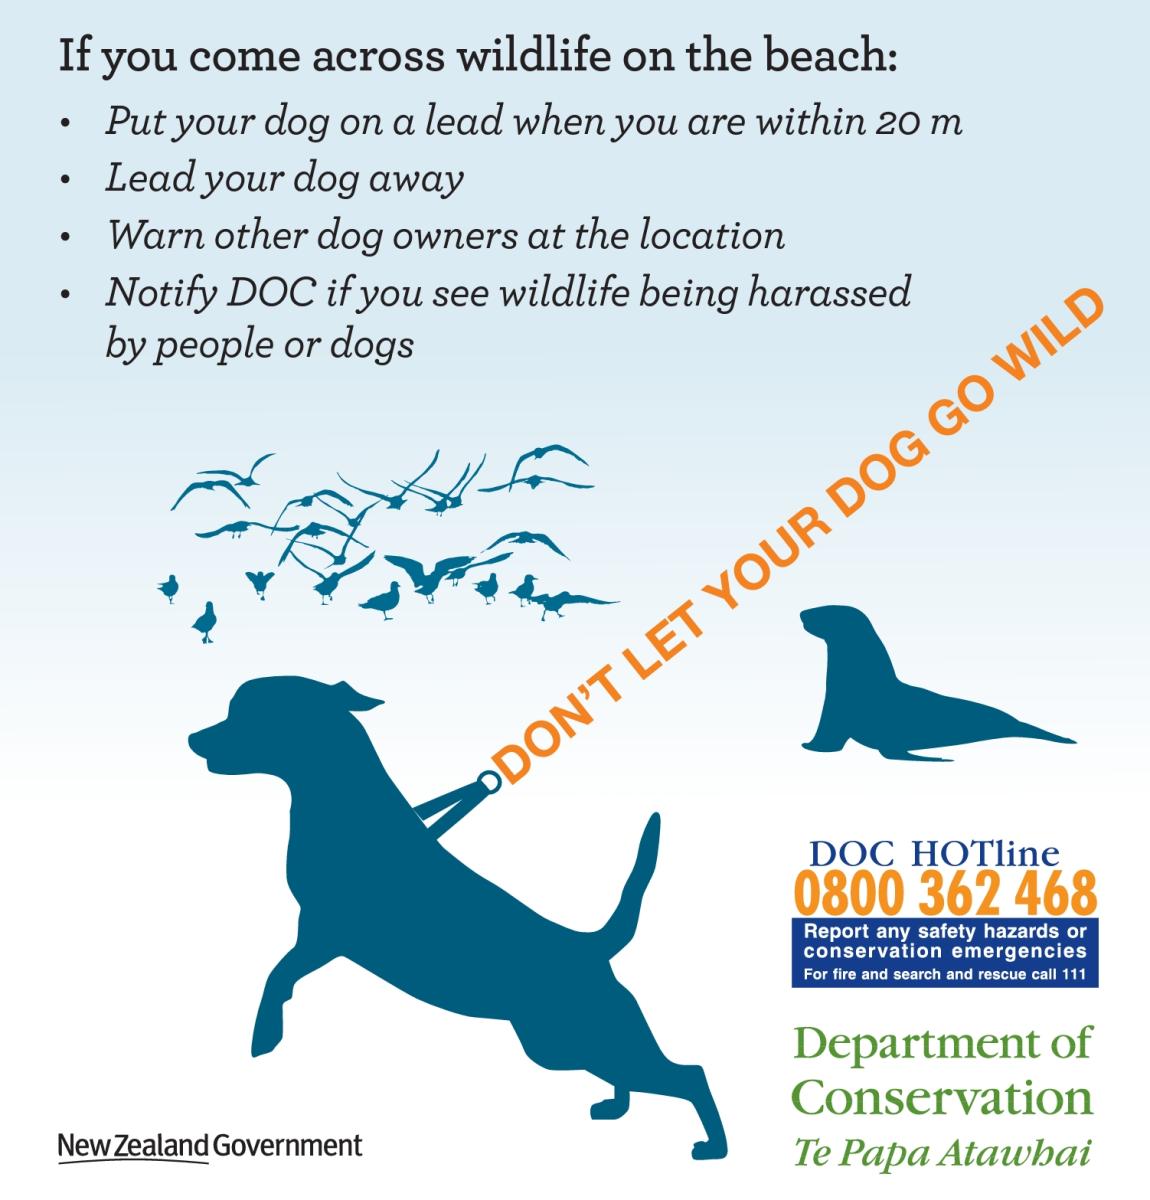 If you come across wildlife on a beach keep your dog on a leash. Image: DOC.